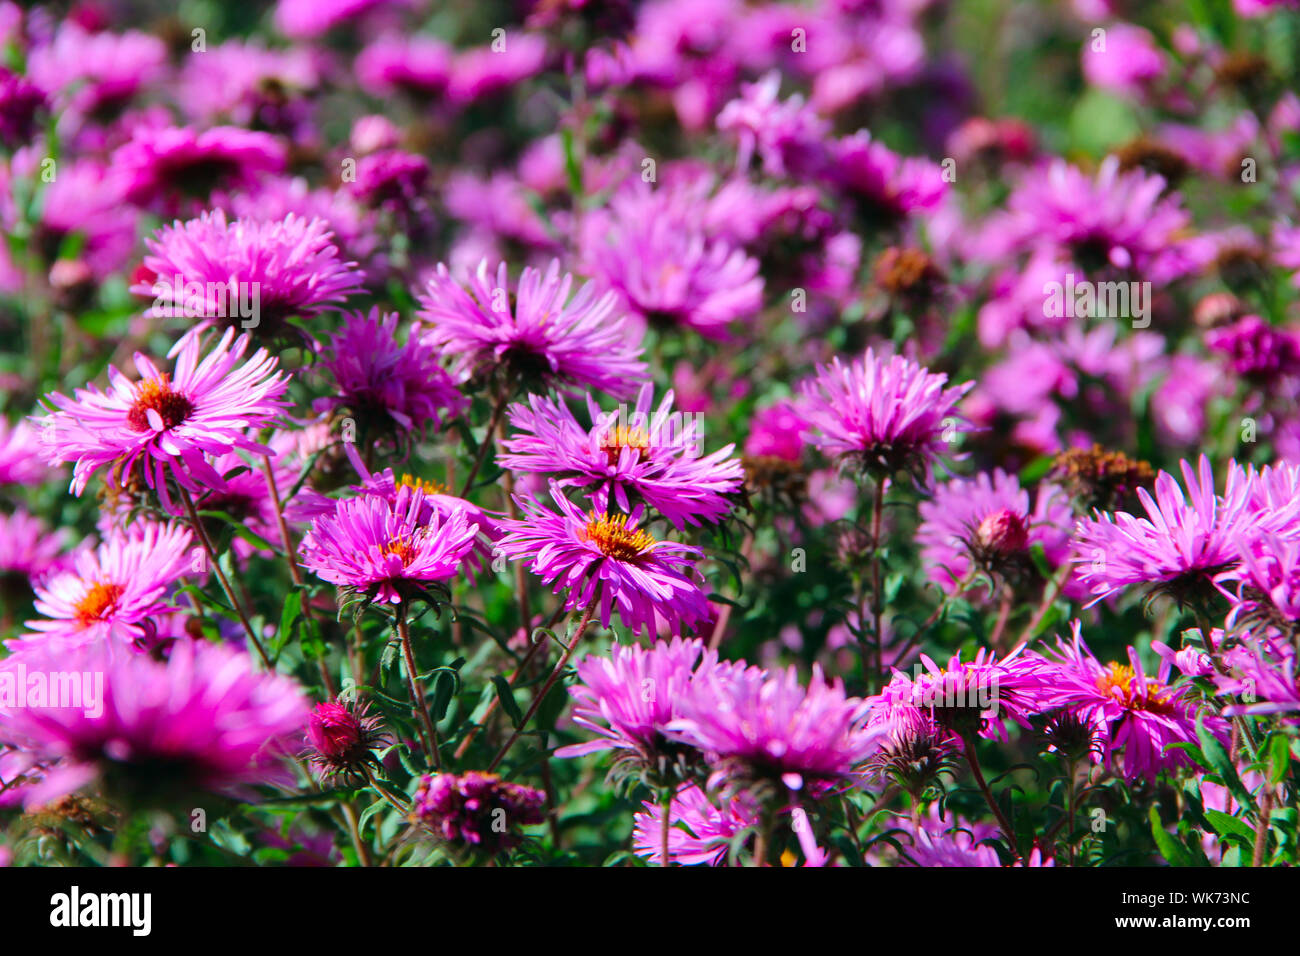 Aster Autumn Flowers. Big bush of lilac asters blooming in yard in September. Bright pink flower asters closeup. Autumnal flowers sway in wind Stock Photo